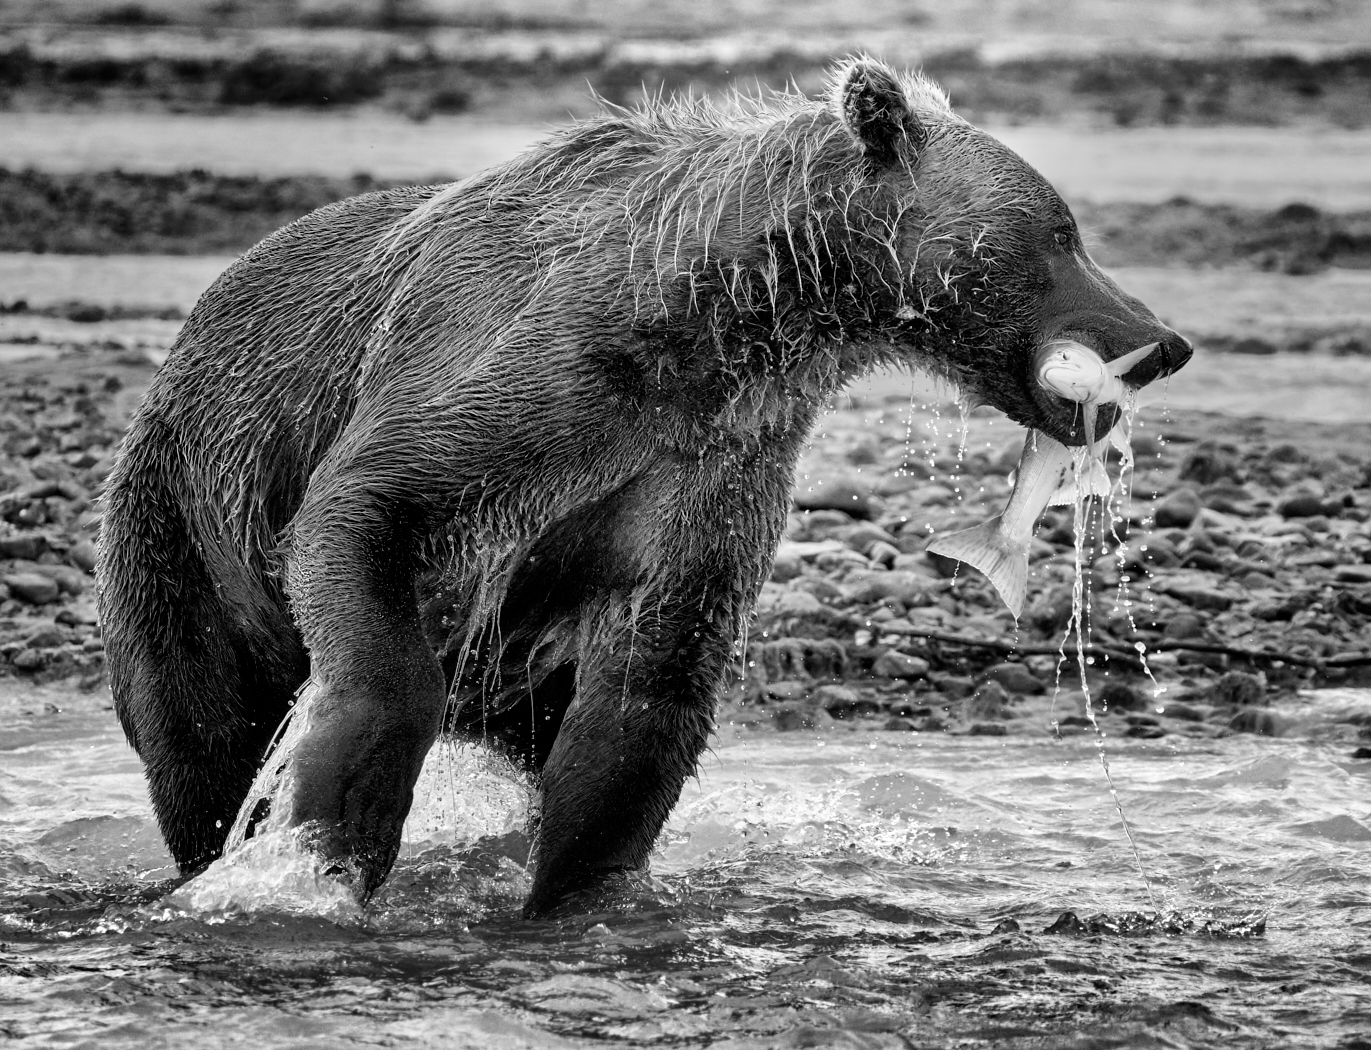 Grizzly & the Catch by Nick Delany, QPSA